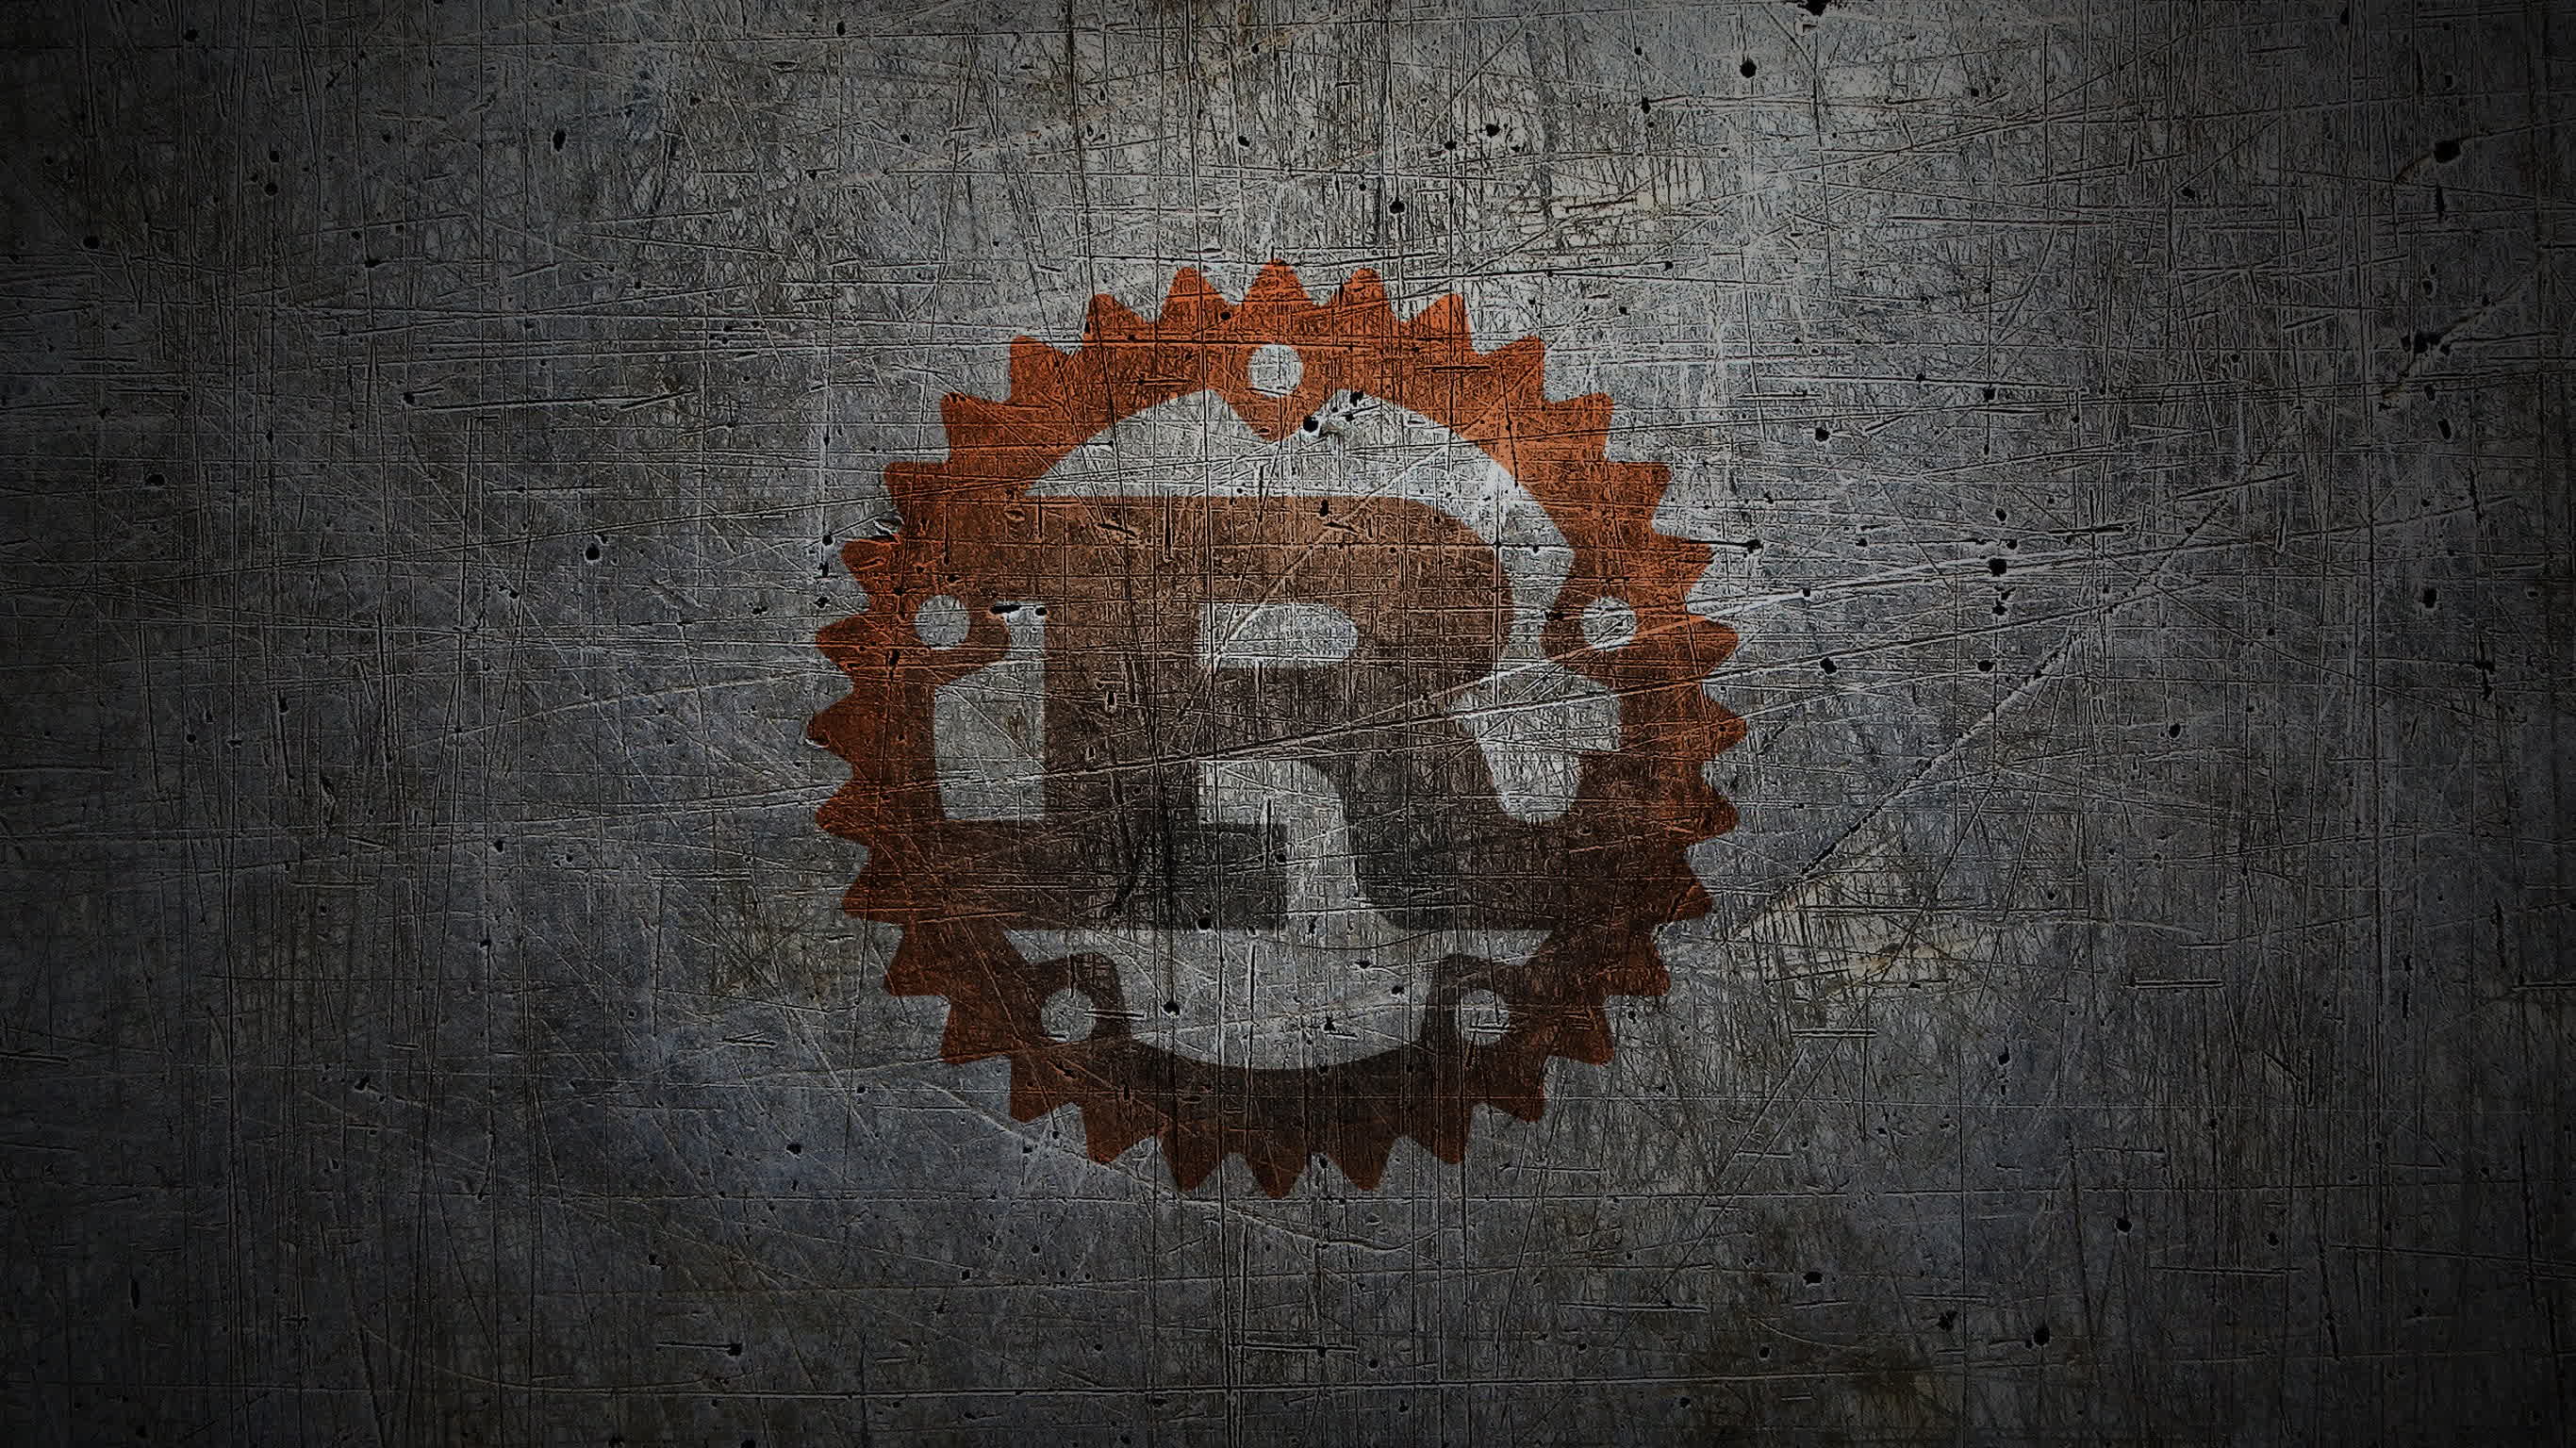 The Rust programming language is growing in popularity